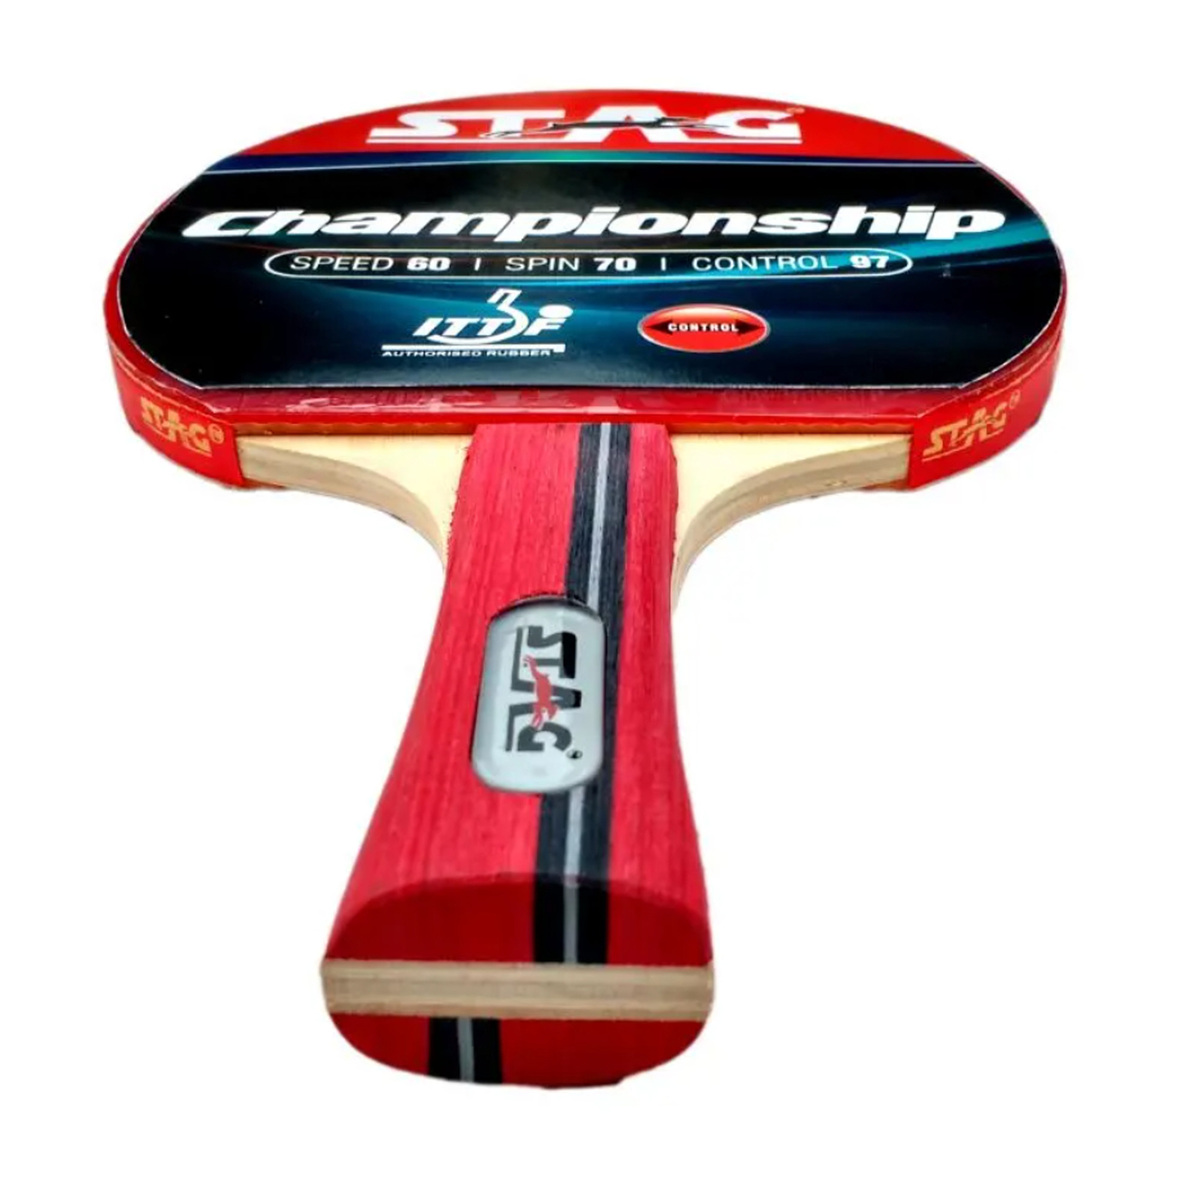 Stag Championship Table Tennis Racket, TTRA-250